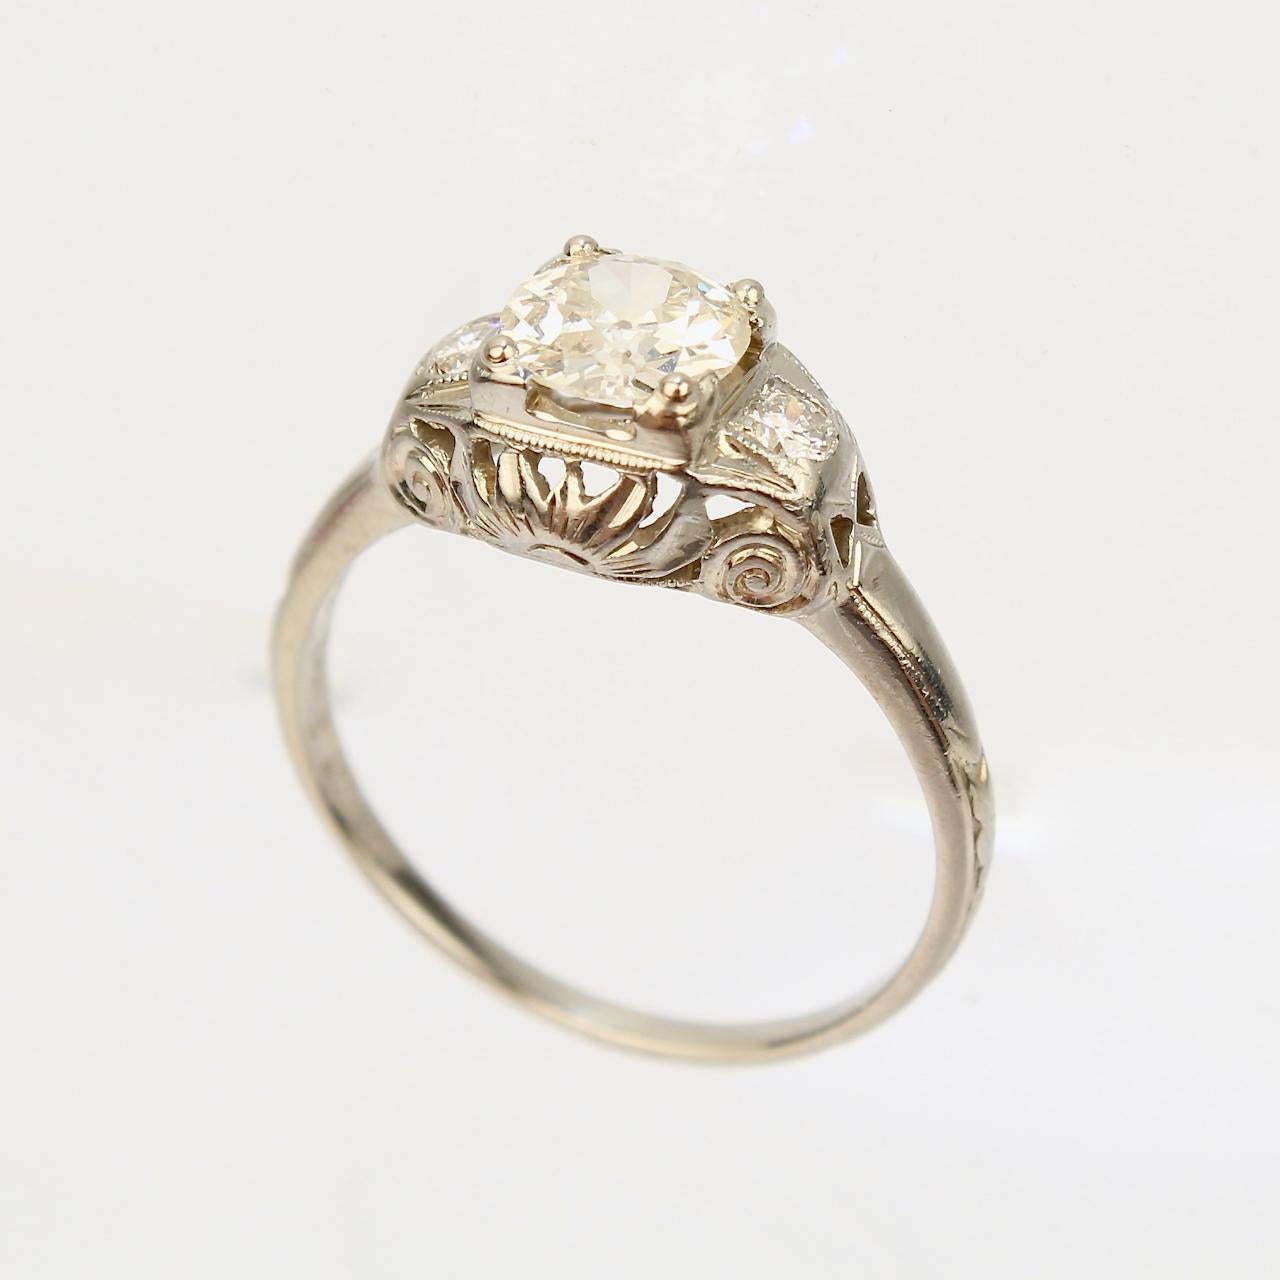 A very fine antique Art Deco Orange Blossom diamond ring.

In 18k white gold with a fine decorative filigree bridge.

Orange Blossom rings are highly desirable and coveted by collectors!

Made by the Traub Manufacturing Co.

The lovely central